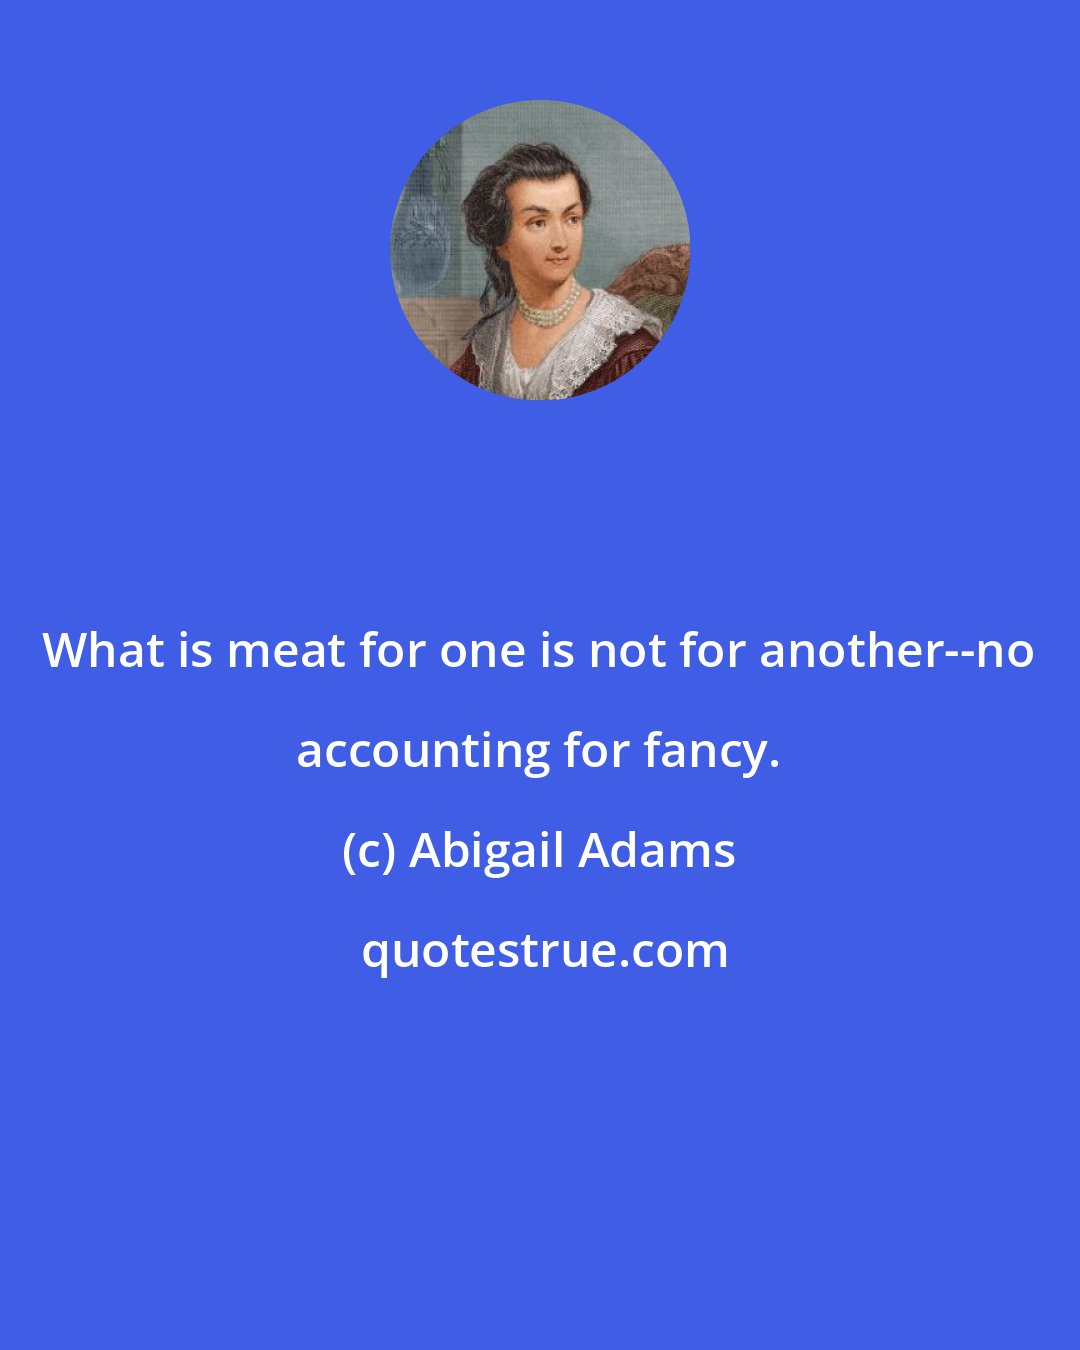 Abigail Adams: What is meat for one is not for another--no accounting for fancy.